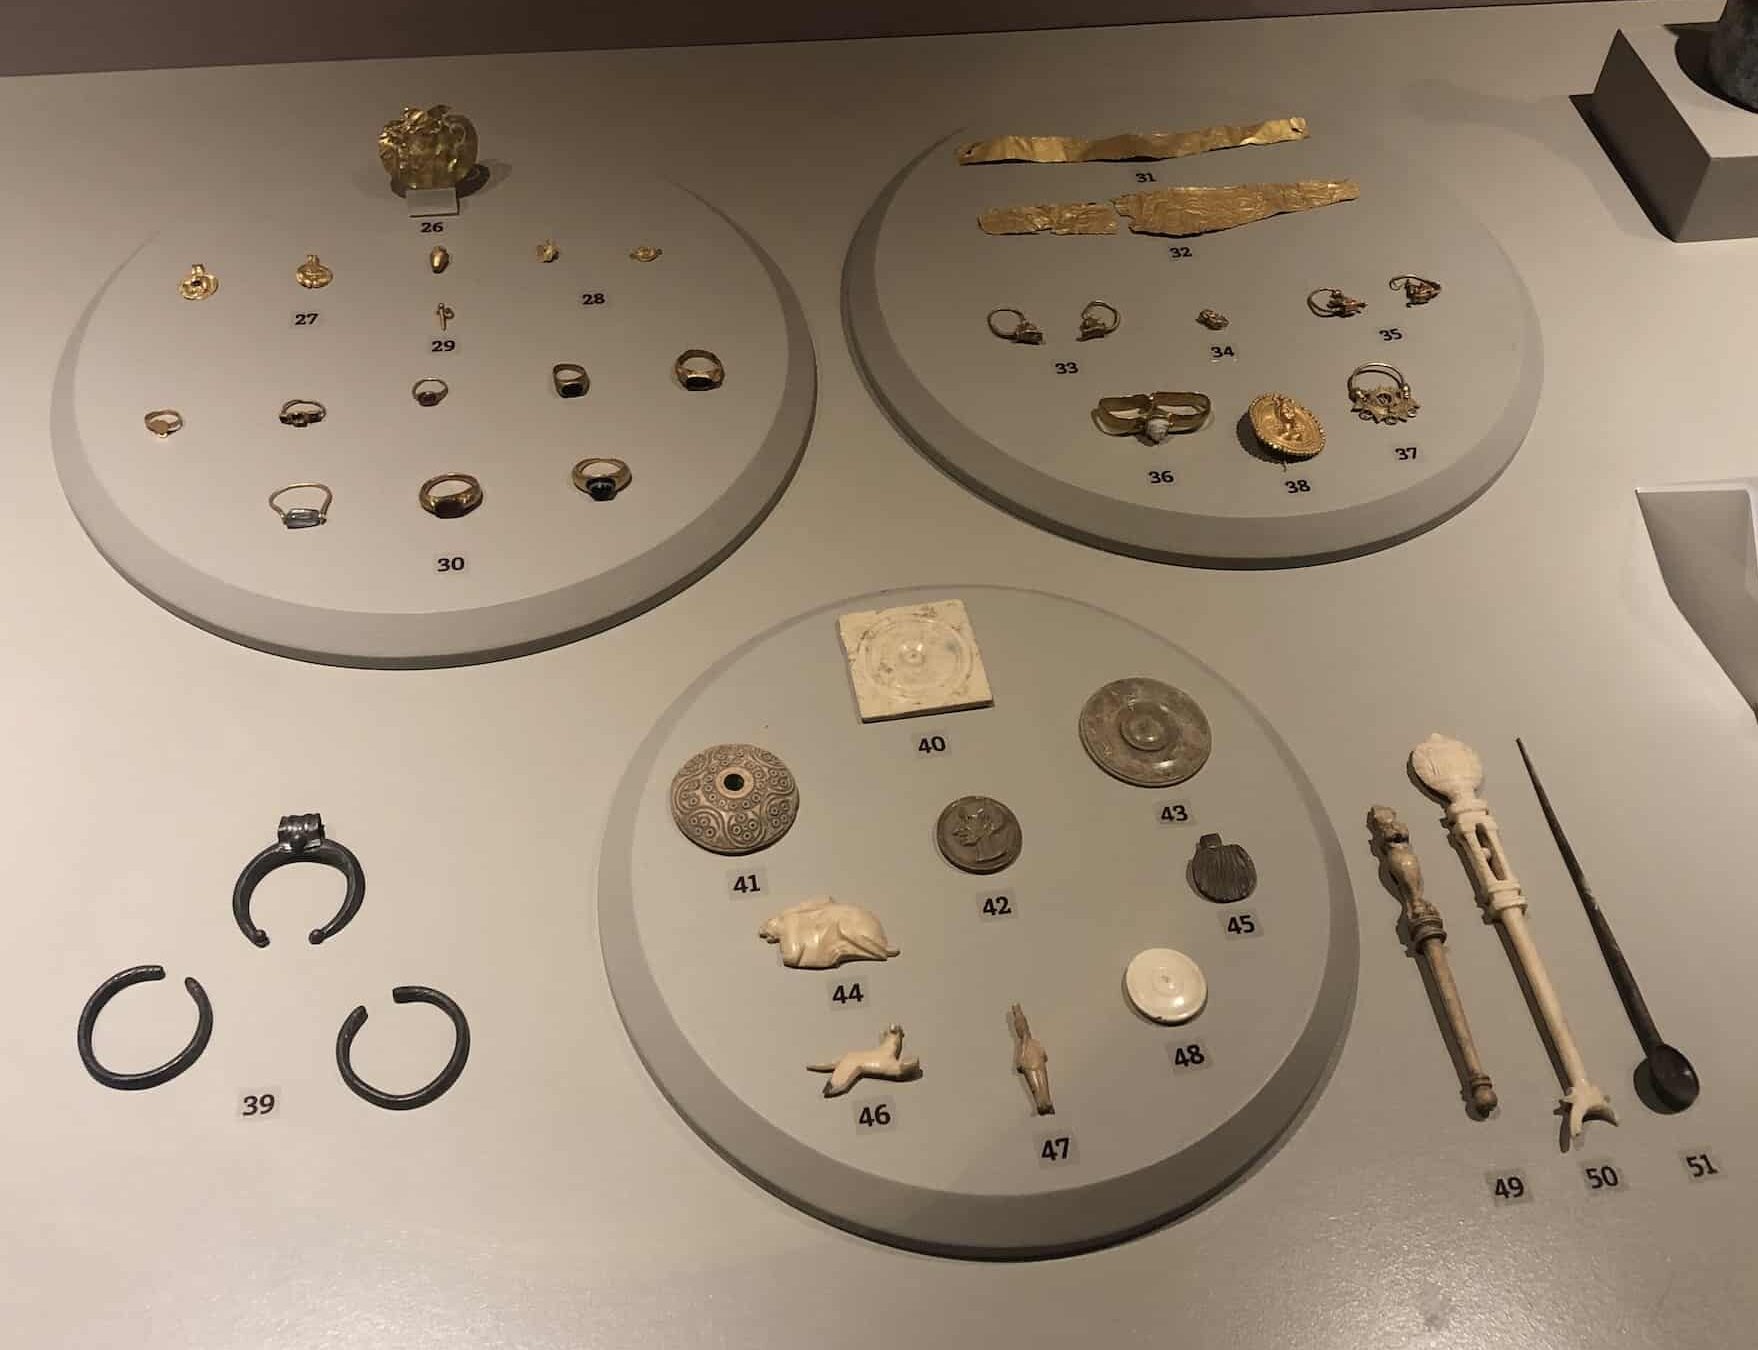 Jewelry (4th century BC to 4th century AD) in Ephesus Through the Ages